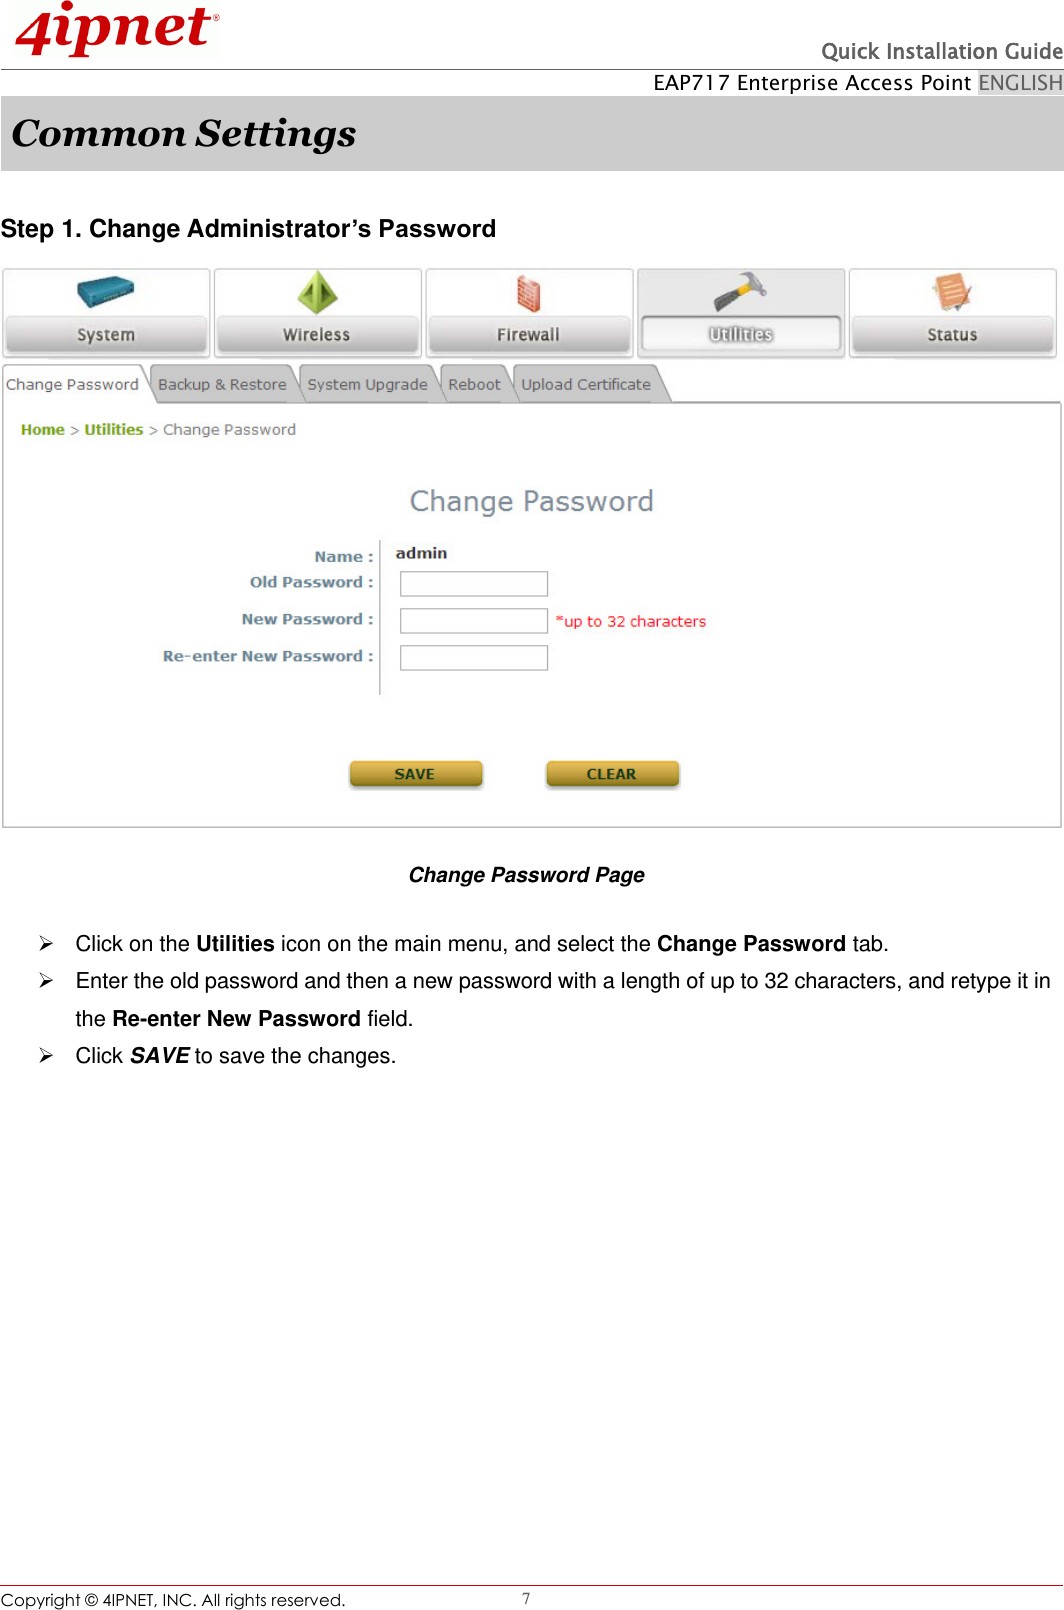  Quick Installation Guide EAP717 Enterprise Access Point ENGLISH Copyright ©  4IPNET, INC. All rights reserved.                                                              7 Common Settings  Step 1. Change Administrator’s Password  Change Password Page   Click on the Utilities icon on the main menu, and select the Change Password tab.   Enter the old password and then a new password with a length of up to 32 characters, and retype it in the Re-enter New Password field.   Click SAVE to save the changes.   